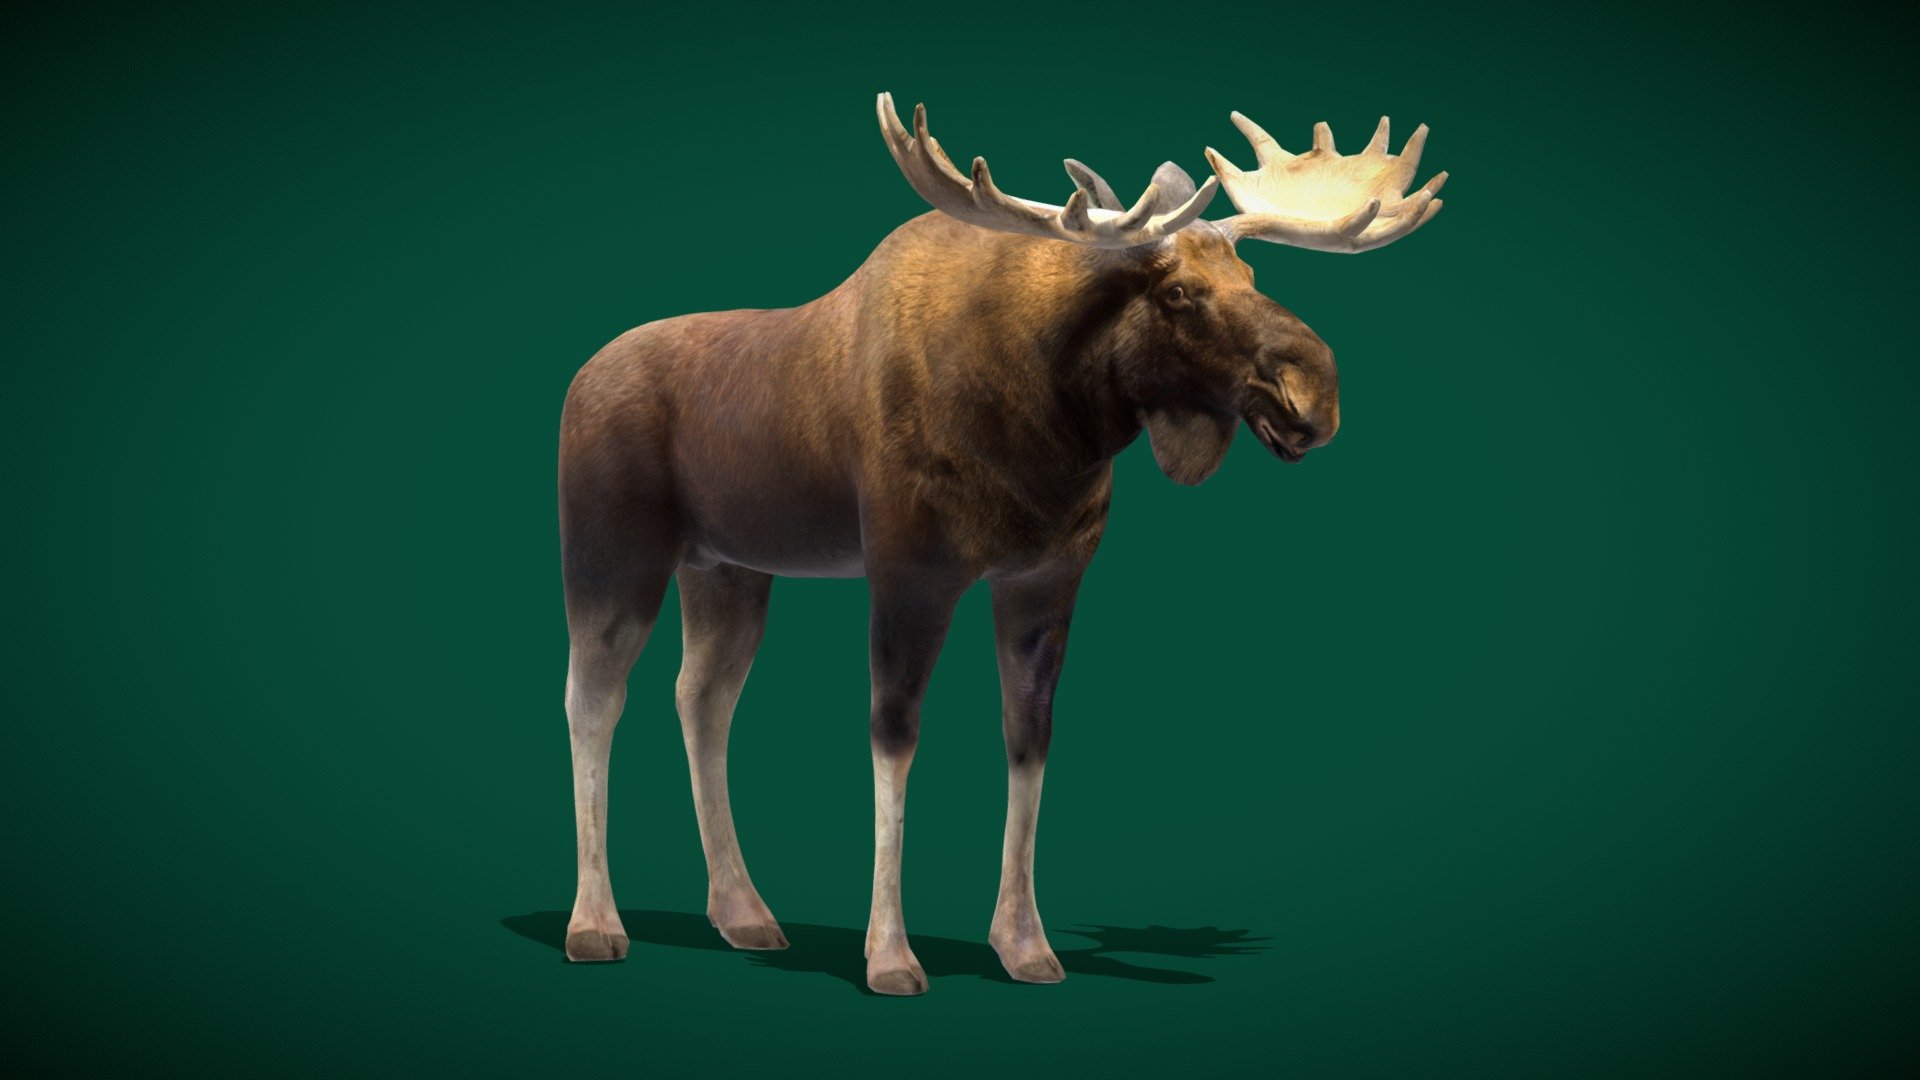 Eurasian elk (second-largest land mammal)   Cheyenne_Mountain Zoo

Alces_alces Animal Mammal (Deer_family) Winter,Arctic

1 Draw Calls

Low Poly

Game Ready

Subdivision Surface Ready

16 Animations

4K PBR Textures  Materials 

Unreal FBX (Unreal 4,5 Plus)

Unity FBX  

Blend File 3.6.5 LTS

USDZ File (AR Ready). Real Scale Dimension

Textures Files

GLB File (Unreal 5.1  Plus Native Support)


Gltf File ( Spark AR, Lens Studio(SnapChat) , Effector(Tiktok) , Spline, Play Canvas,Omiverse ) Compatible




Triangles : 8922



Vertices  : 4463

Faces     : 4461

Edges     : 8922

Diffuse, Metallic, Roughness , Normal Map ,Specular Map,AO,

The moose or elk is the only species in the genus Alces. The moose is the tallest and second-largest land mammal in North America, only falling short of the American buffalo in terms of mass. It is the largest and heaviest extant species of deer 3d model